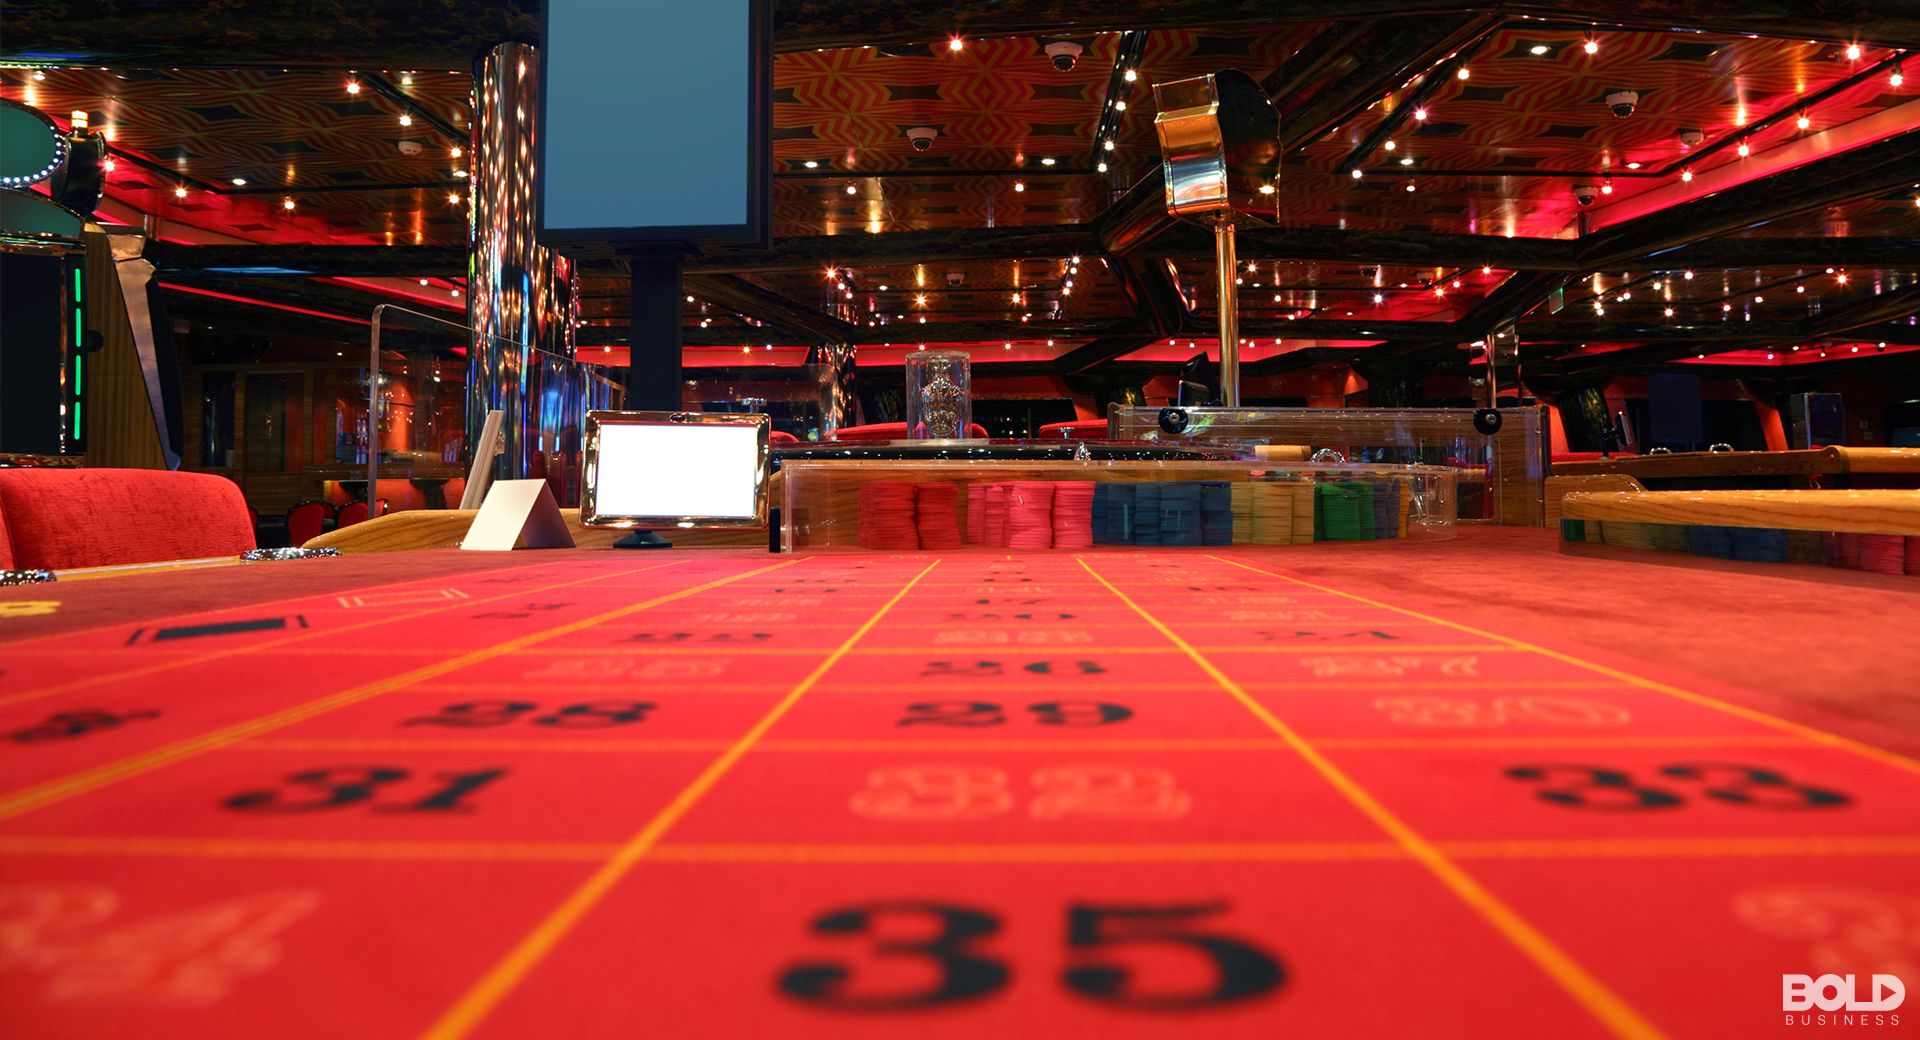 An empty casino view from the felt of a roulette board